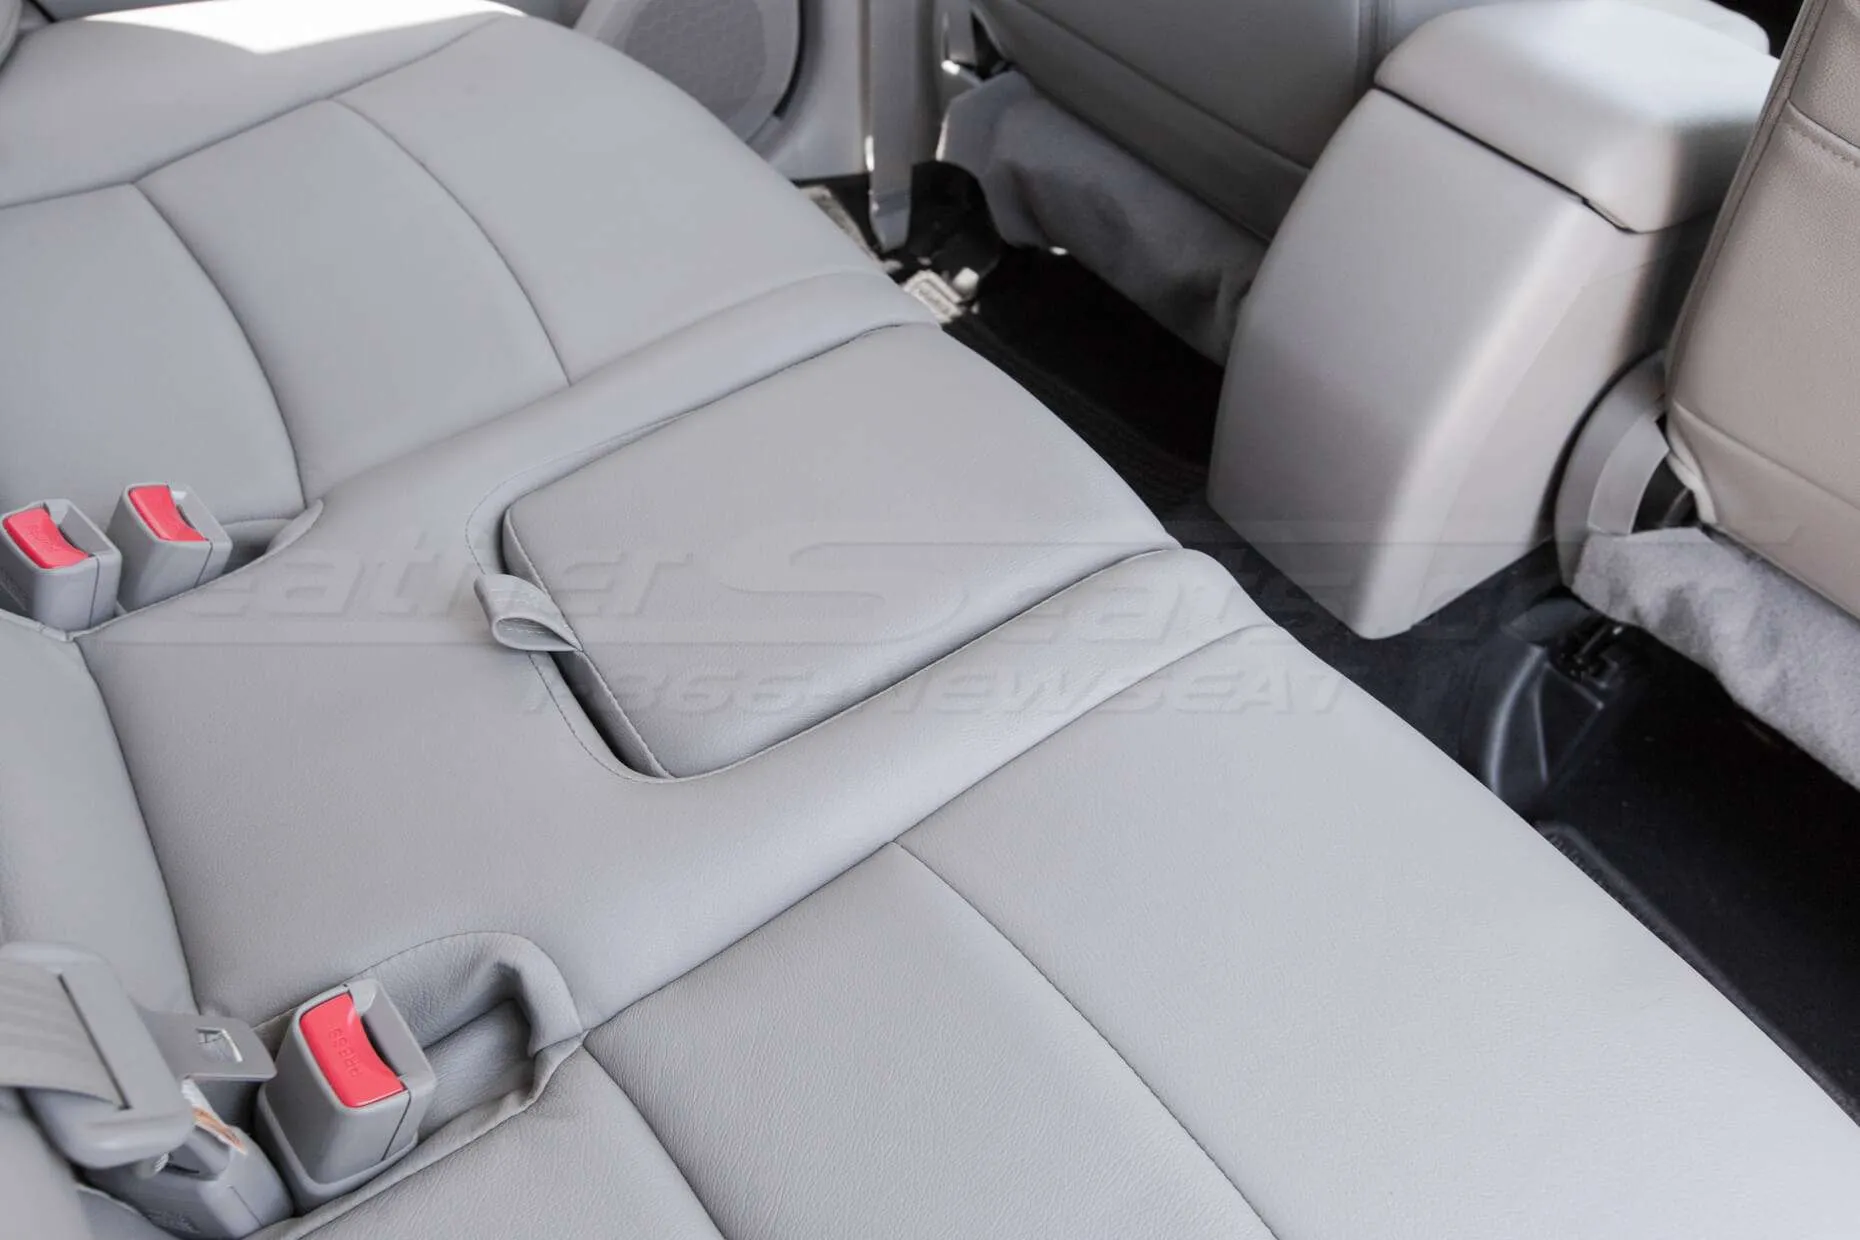 2011-2013 Subaru Forester Leather Seats - Ash - Installed Rear seat cushions